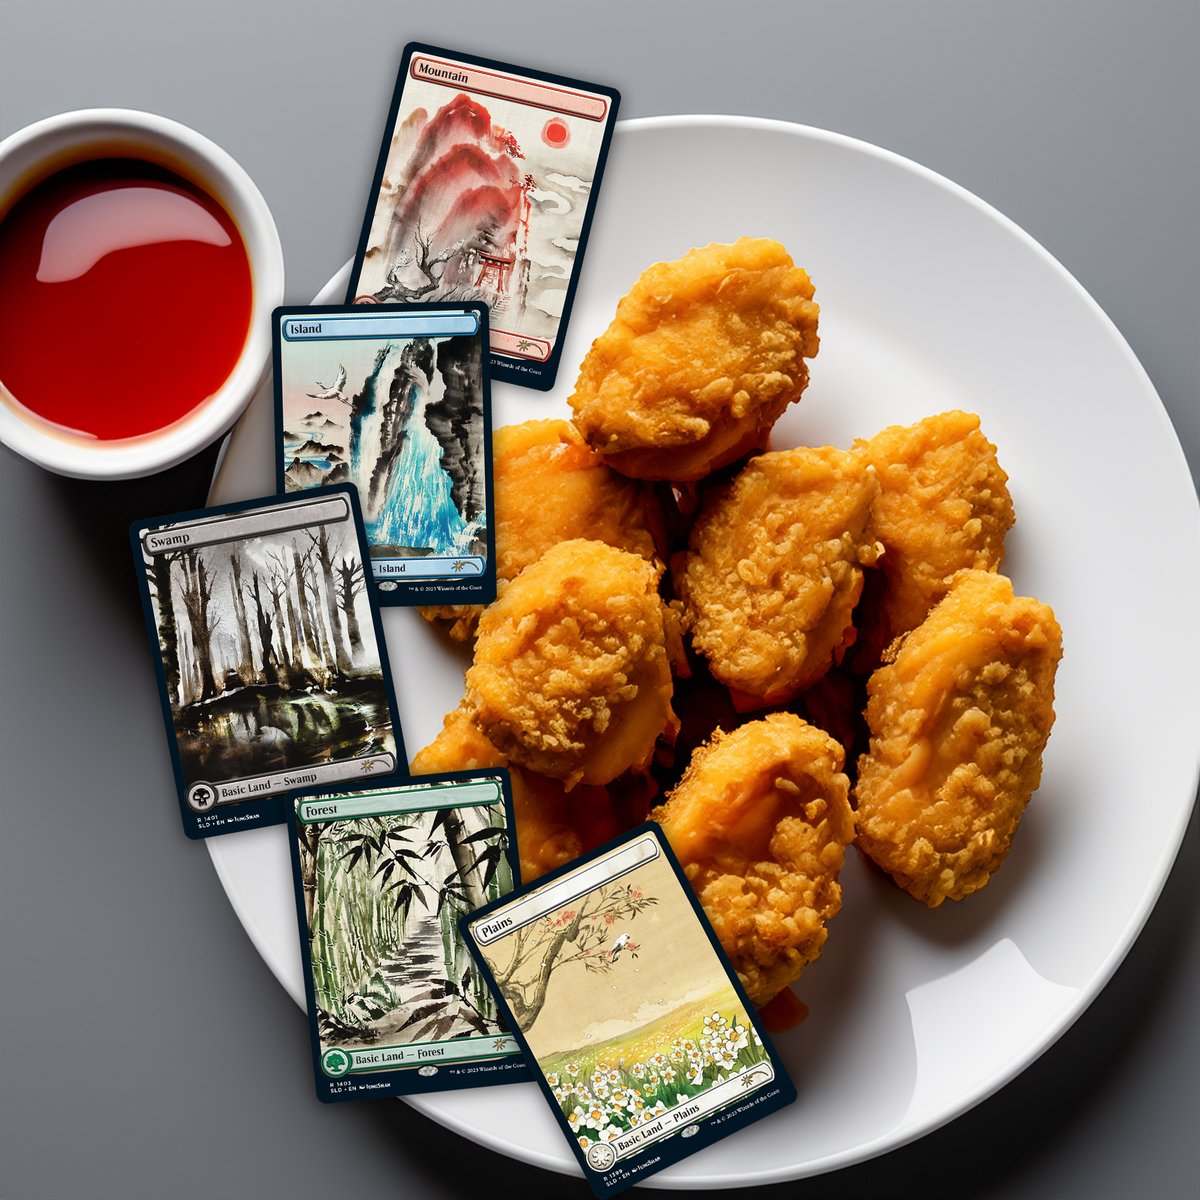 Enjoy a lunch of chicken nuggets, ketchup, and seemingly a secret lair